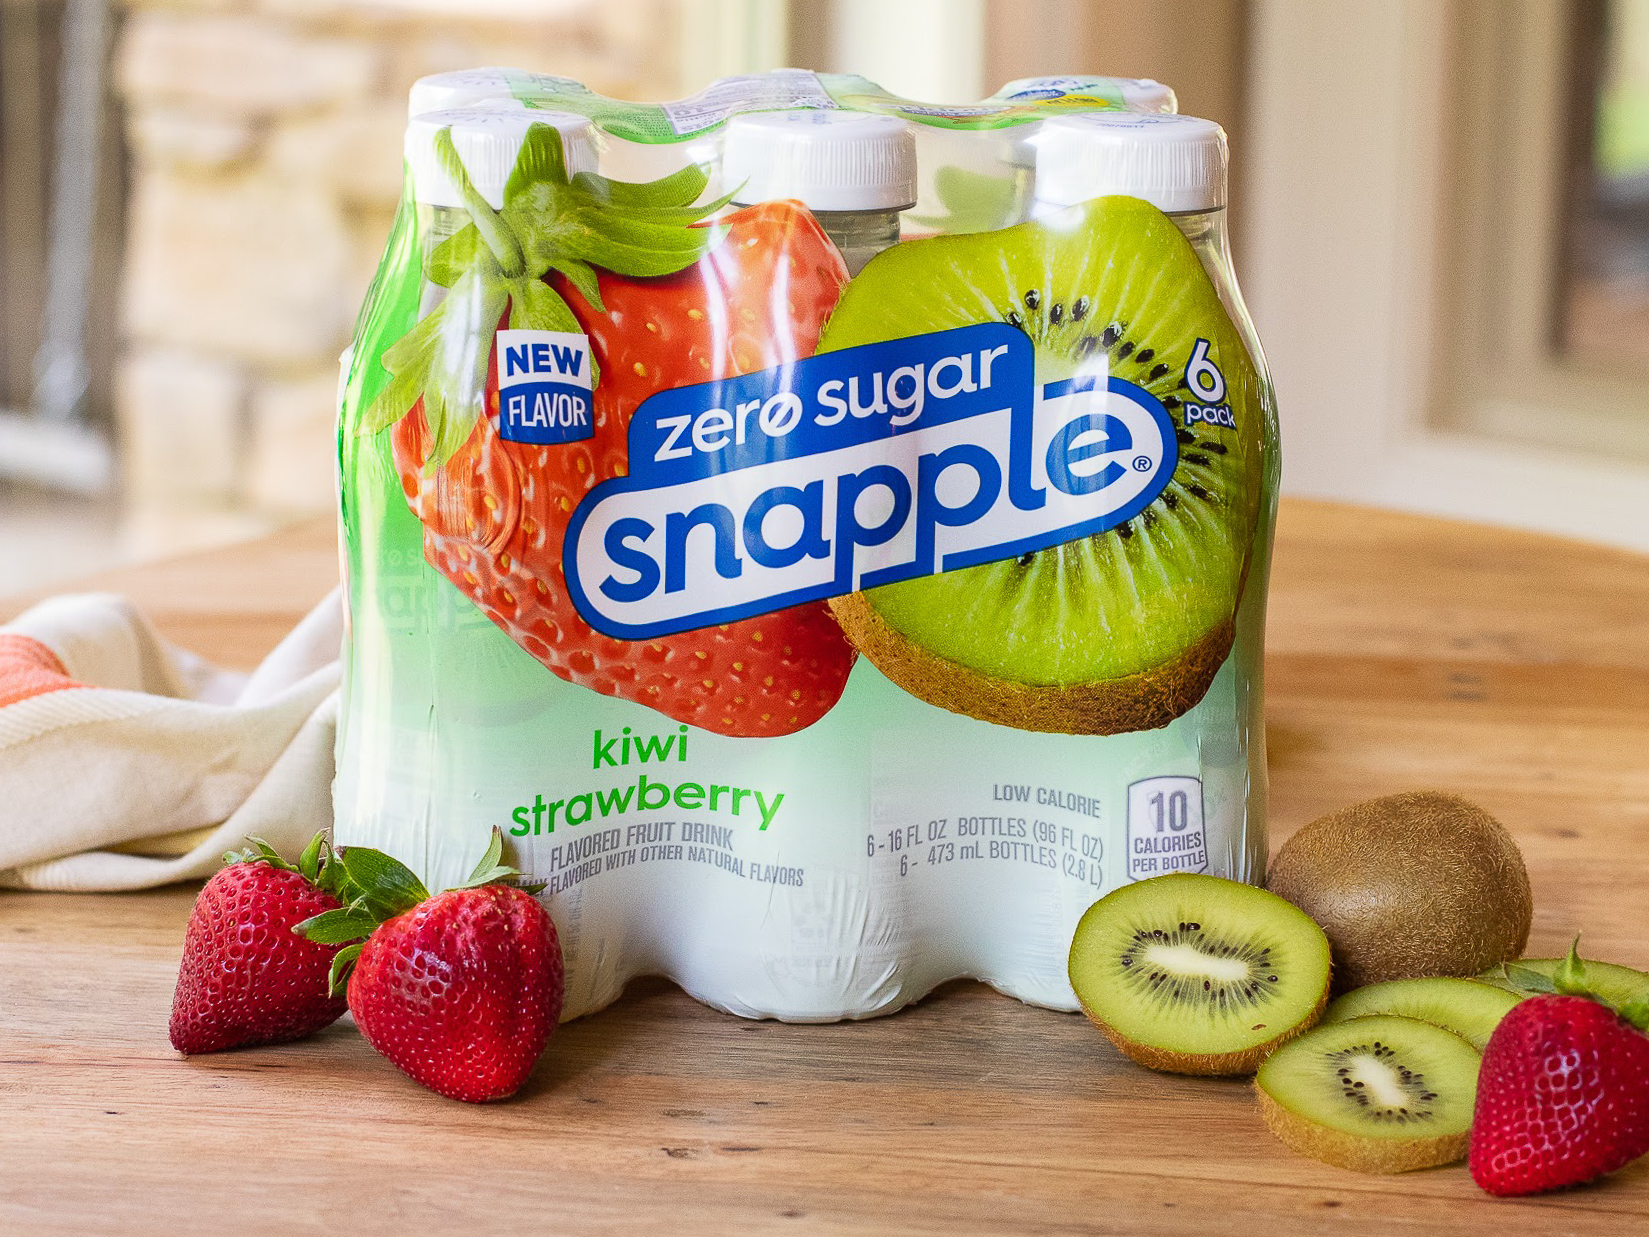 6-Packs Of Snapple Just $3.99 At Kroger